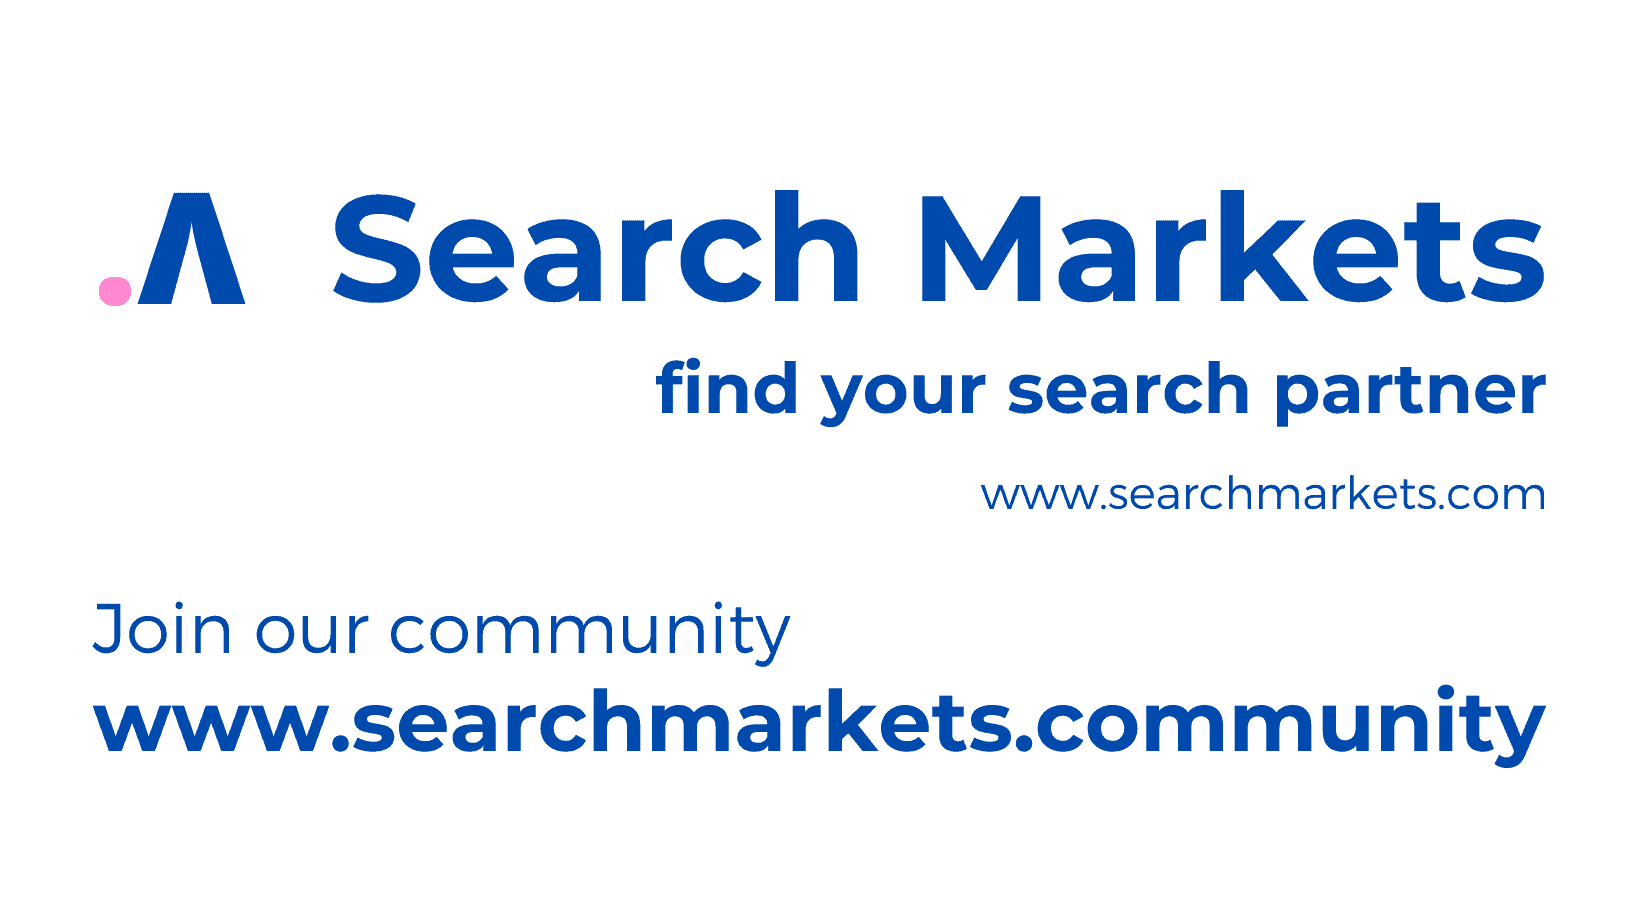 Search-Markets-Facebook-banner-Group-1.png